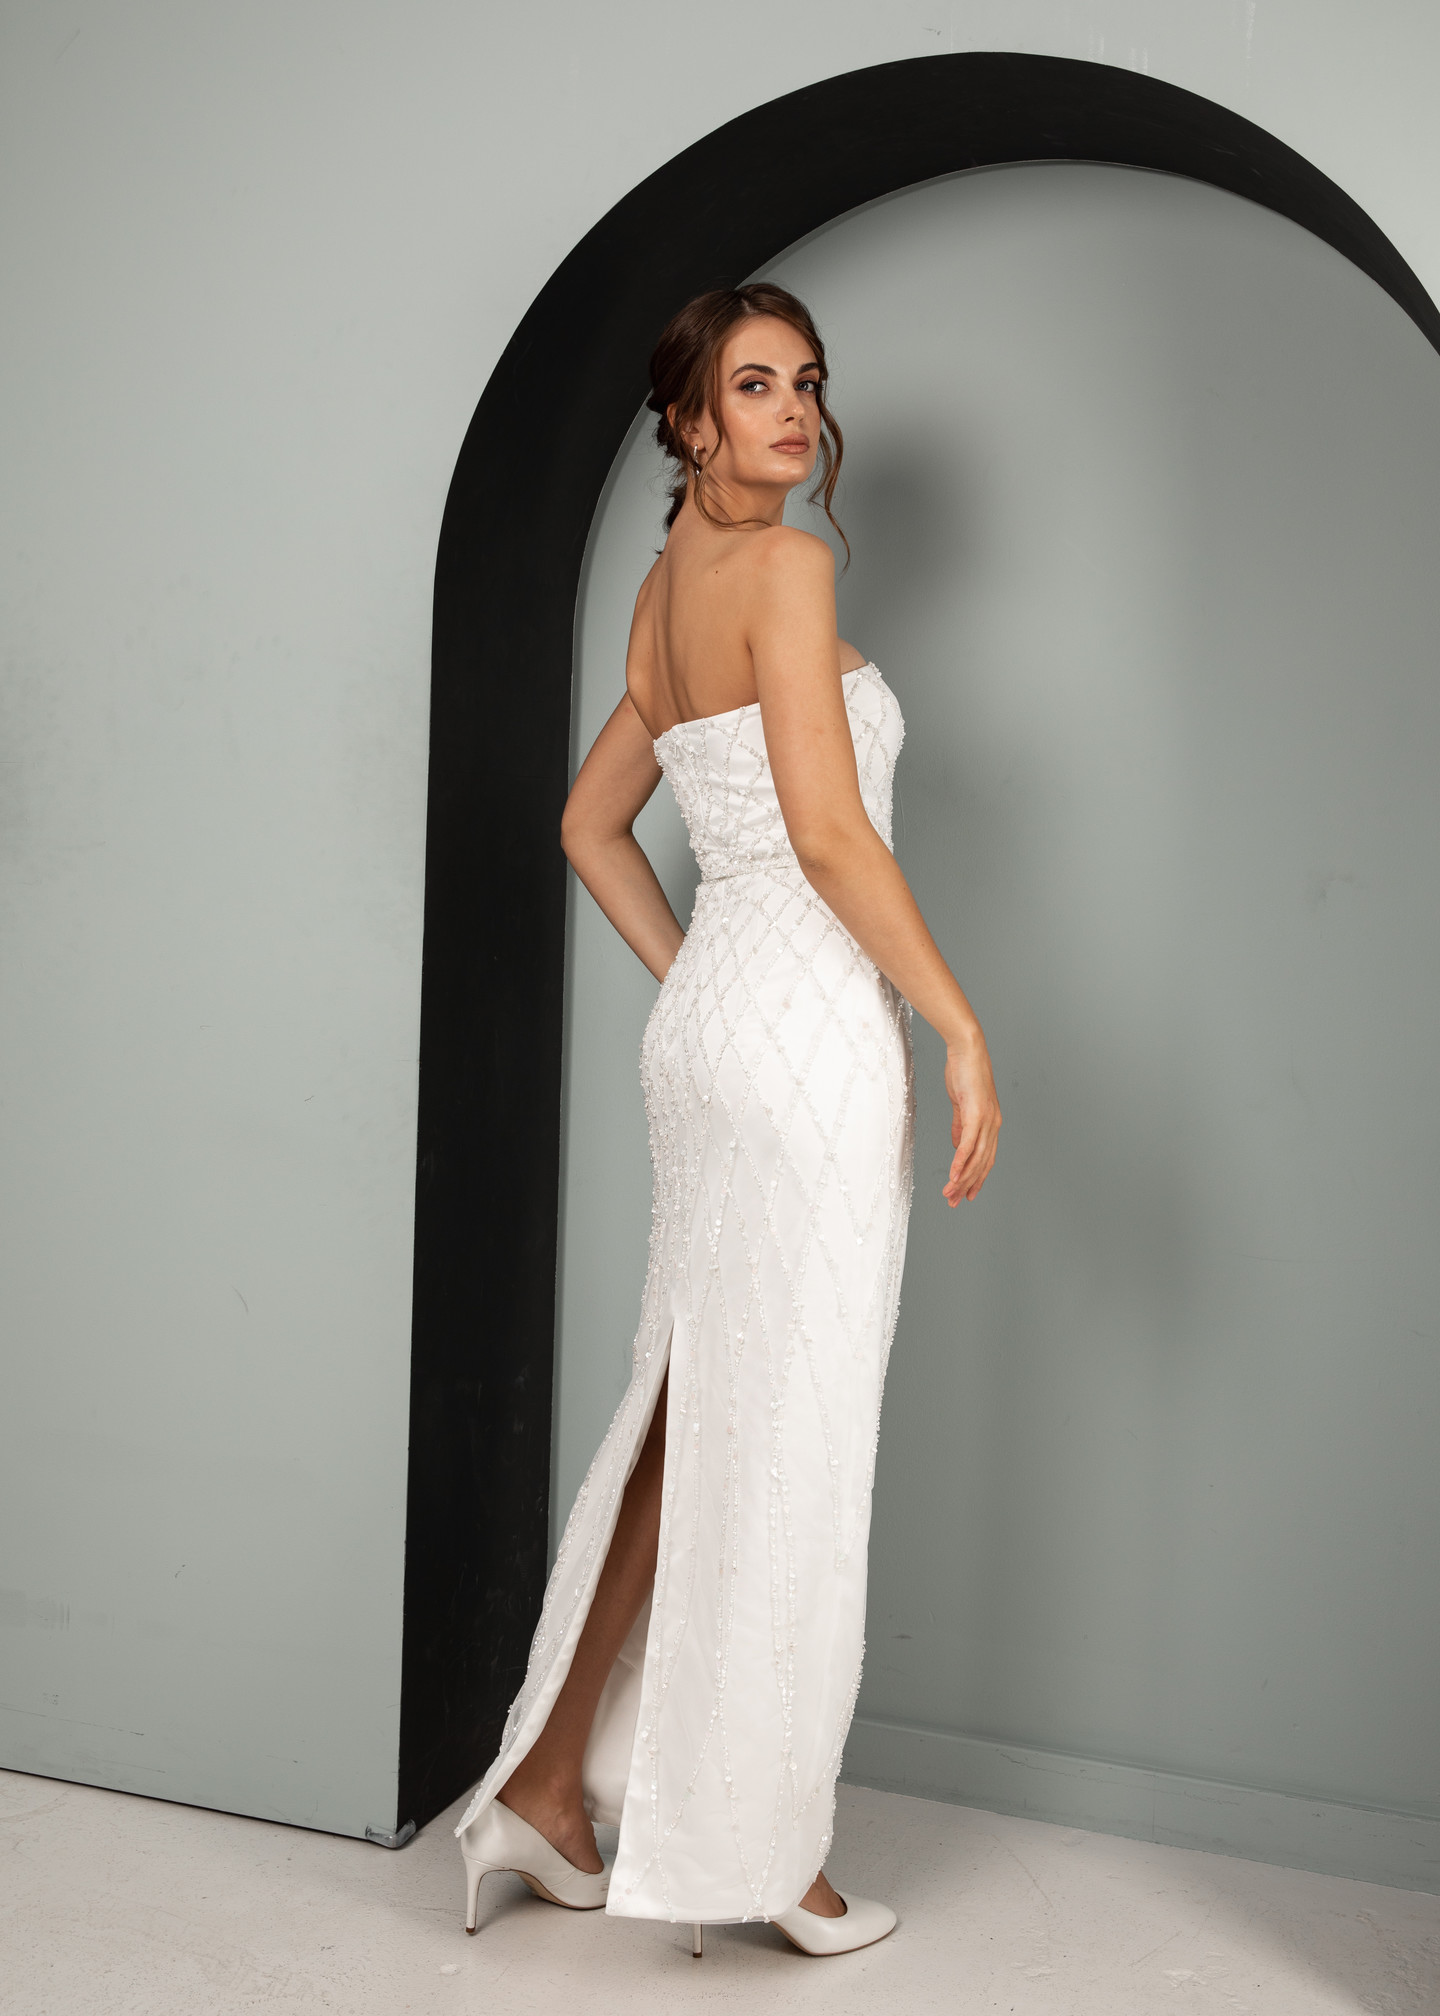 Grace dress, 2021, couture, dress, bridal, off-white, embroidery, sheath silhouette